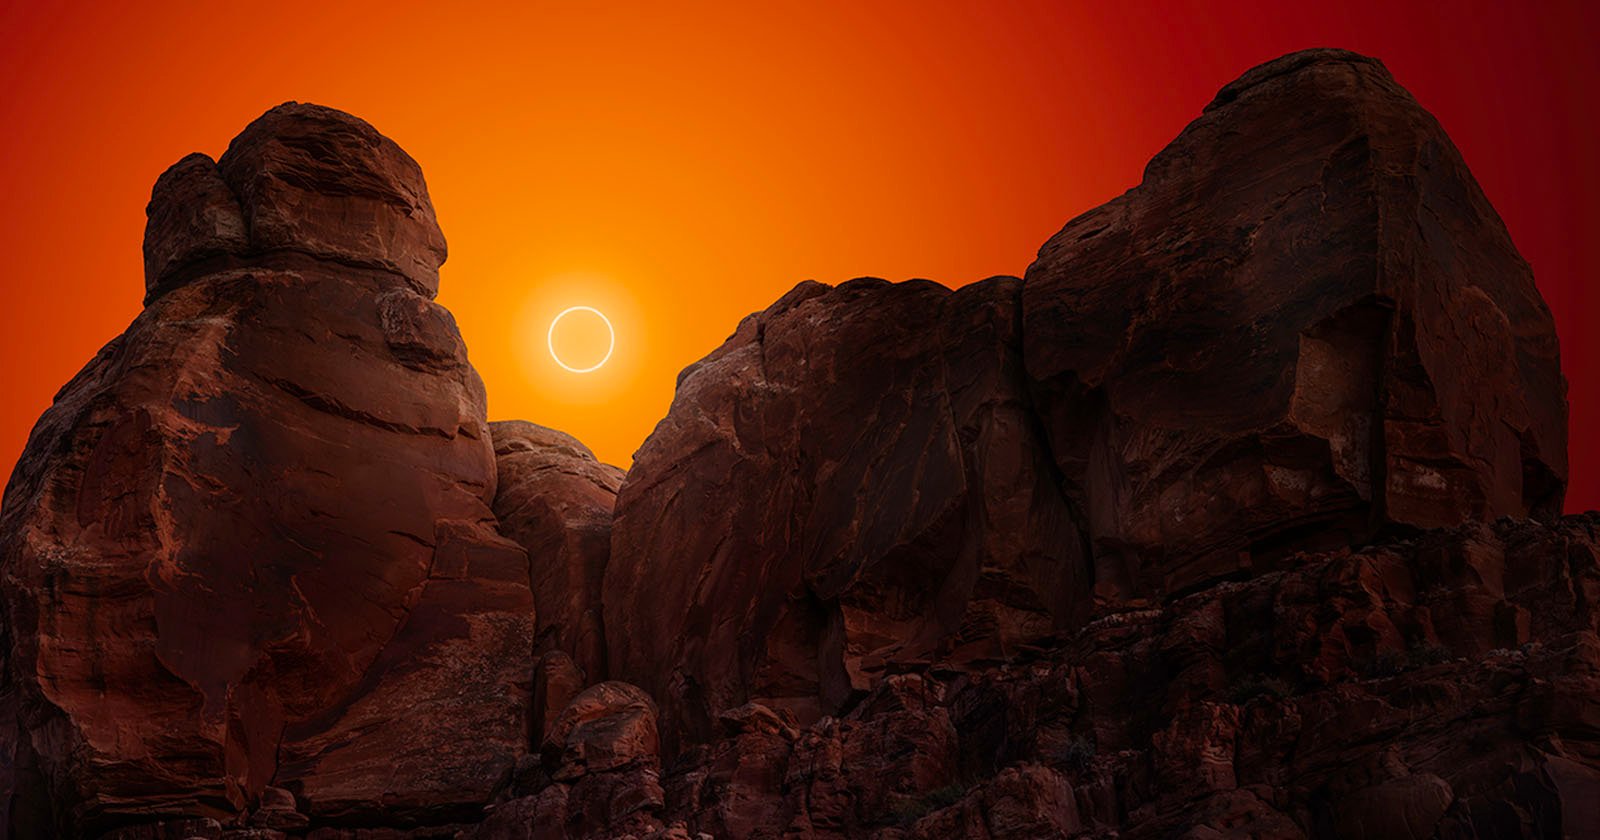  two photographers create magnificent gigapixel image annular solar 